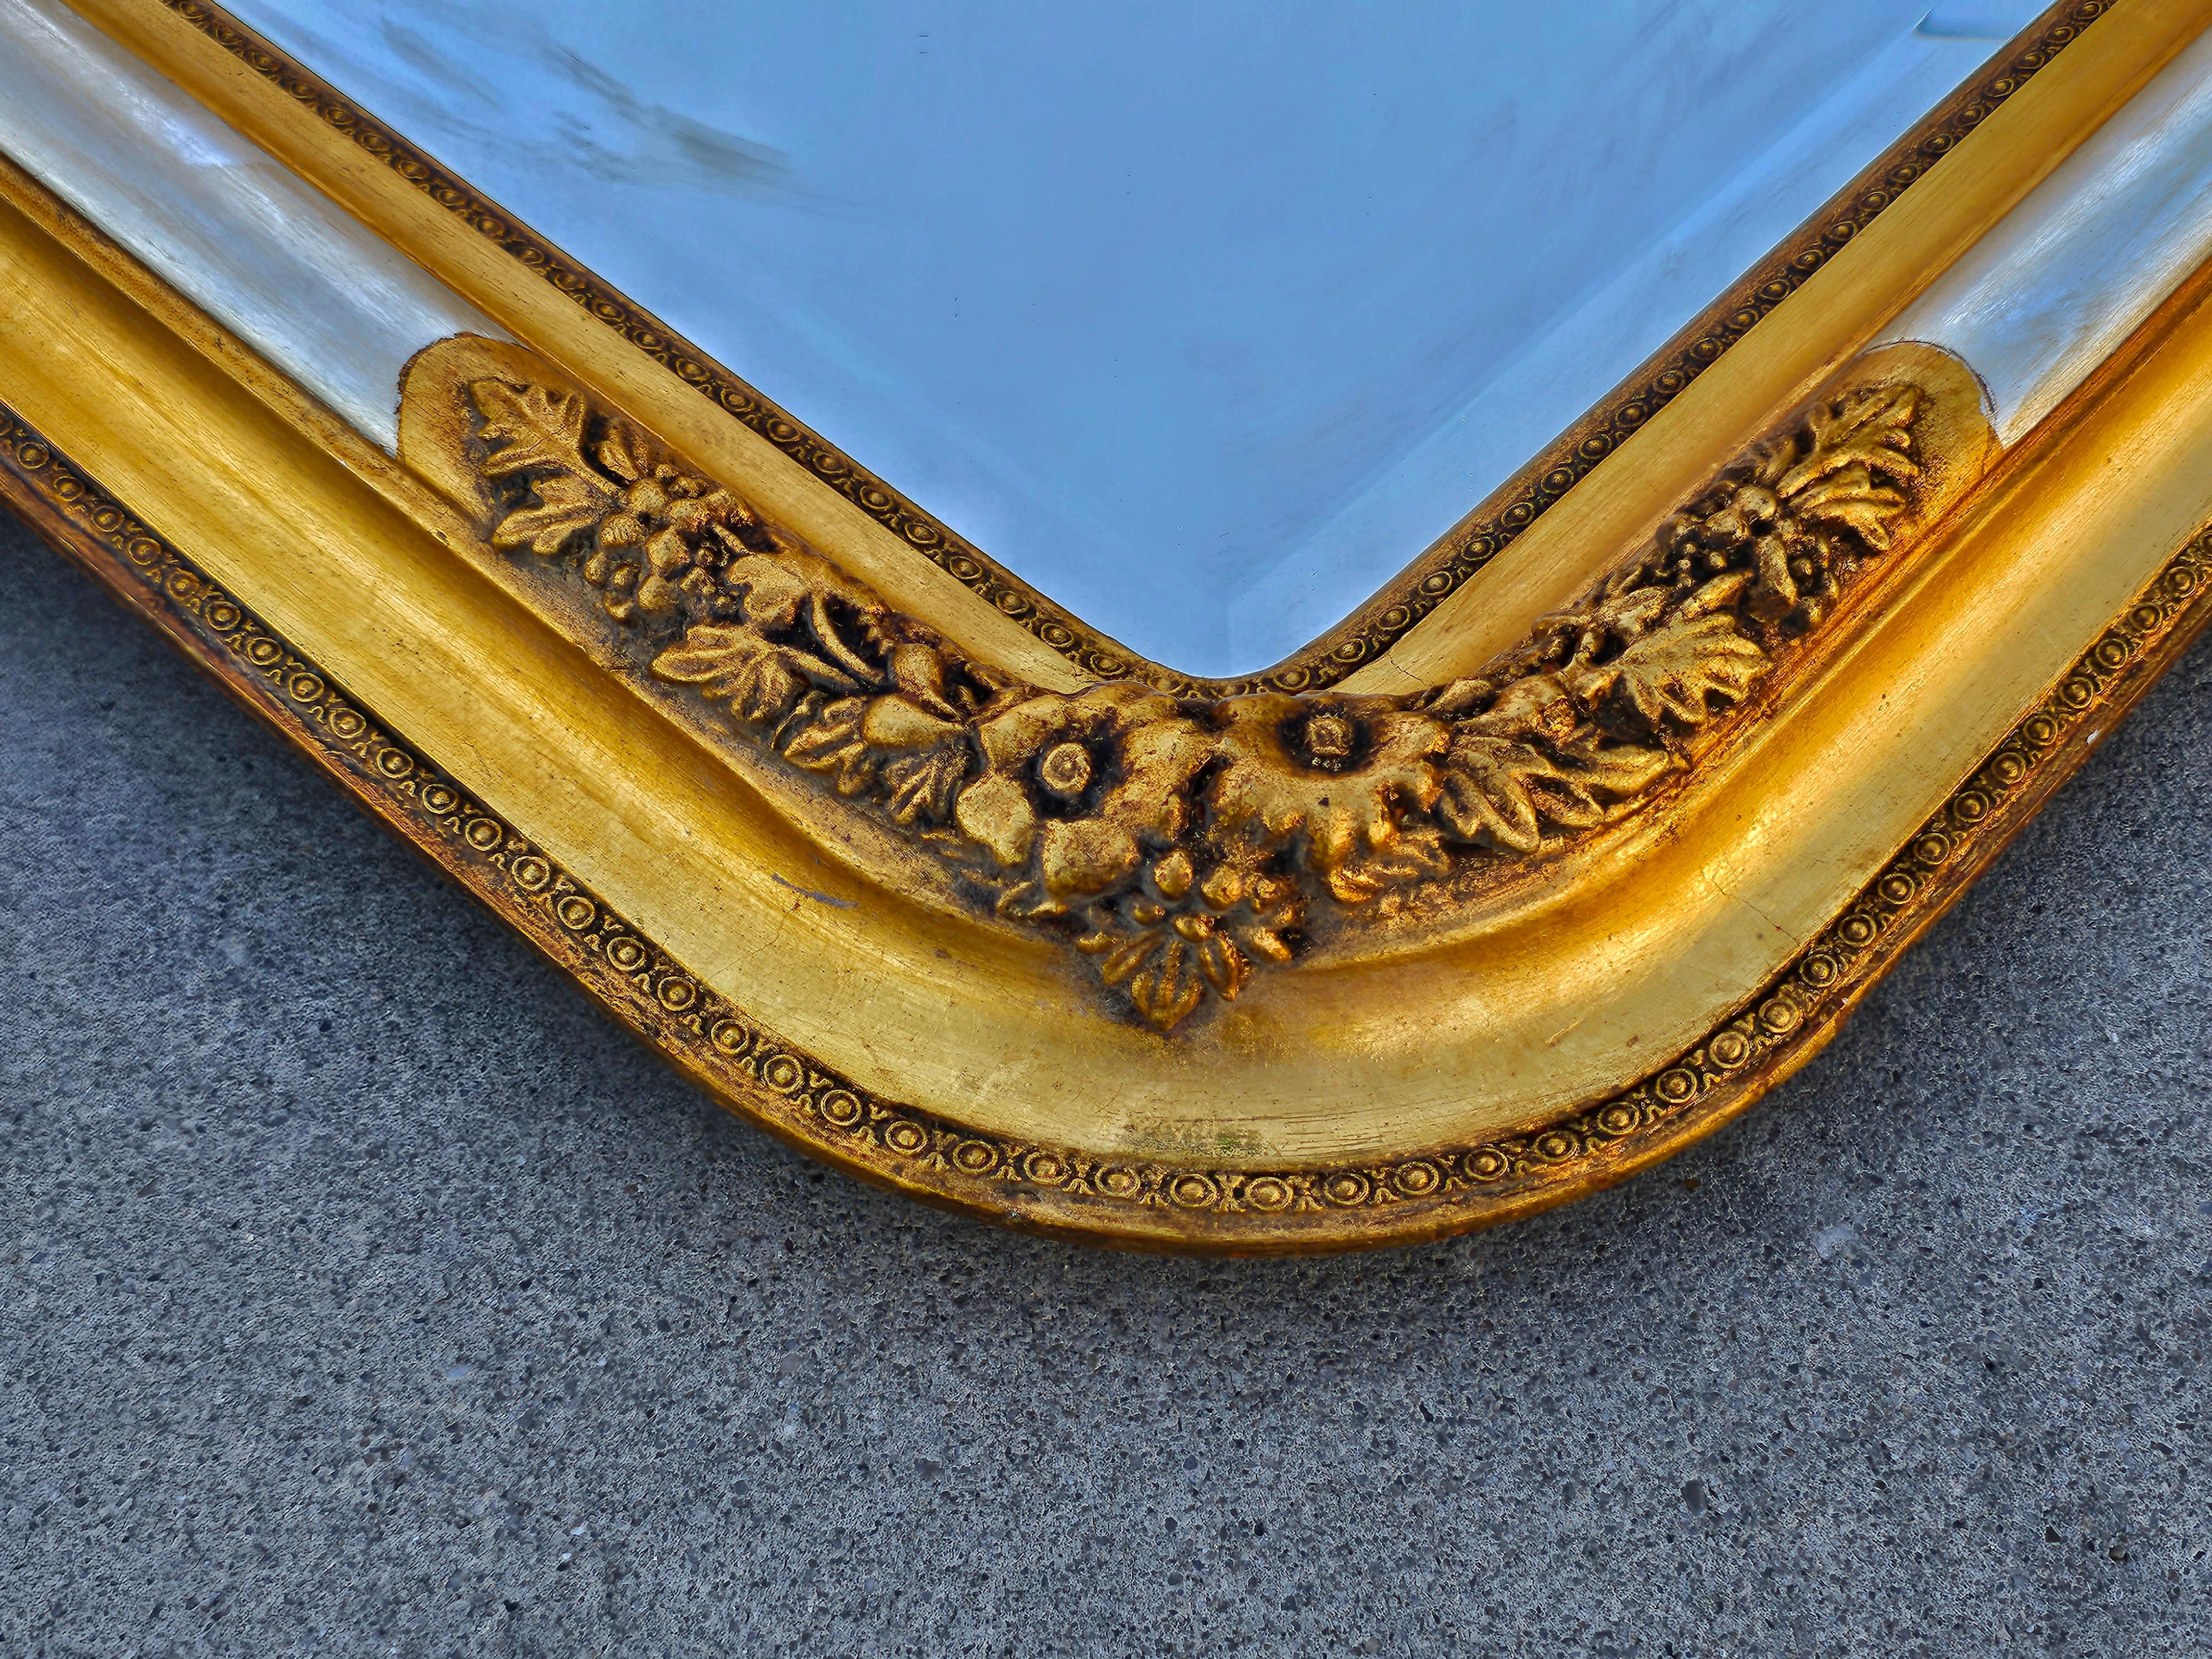 Mid-19th Century Large and rare Biedermeier Gold Plated Mirror, Austria cca. 1840s